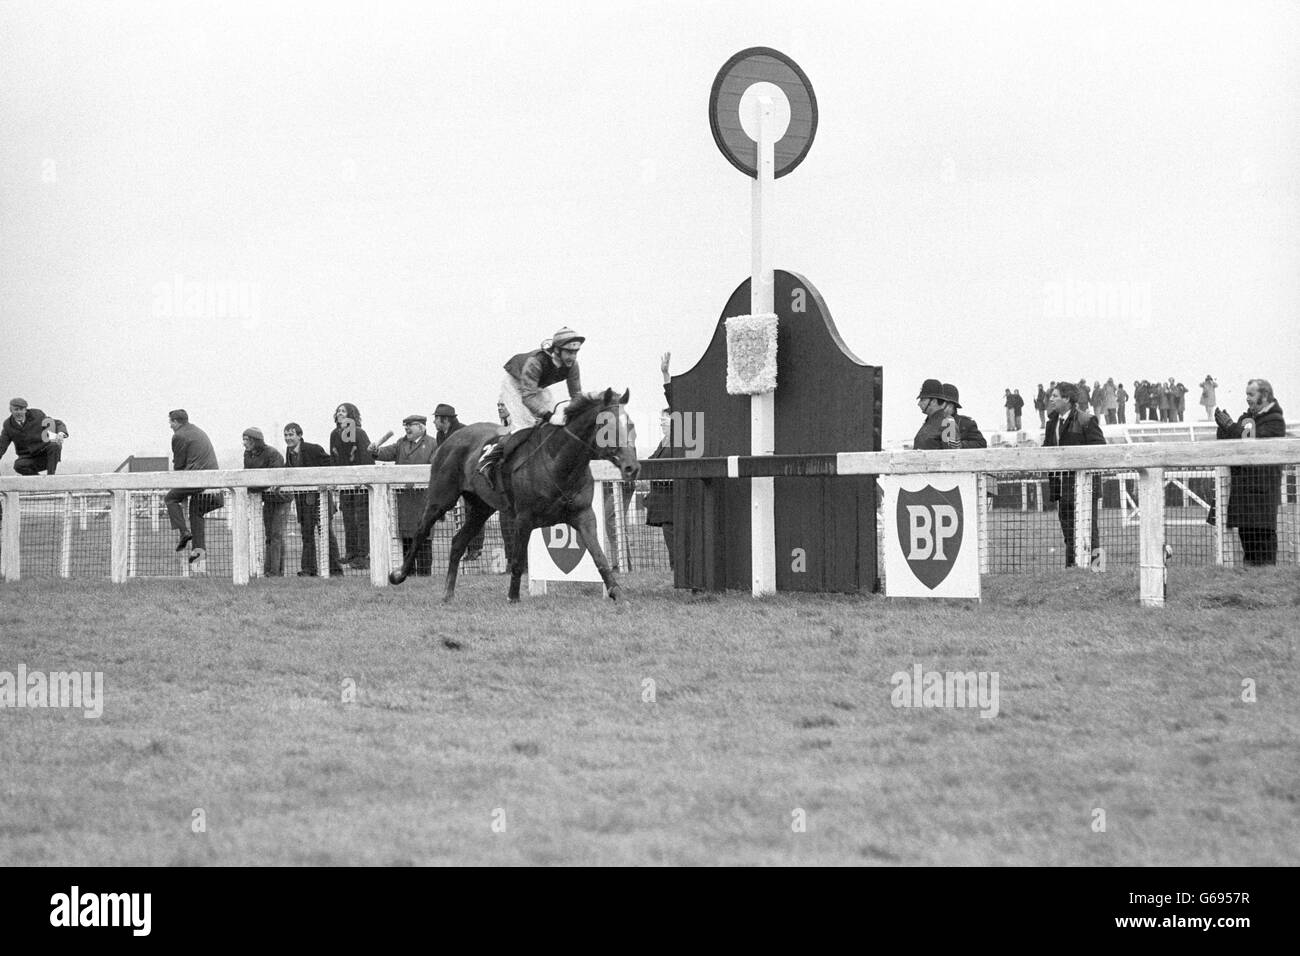 Ridden by champion jockey Graham Thorner, Well To Do, a gift horse to Wantage owner-trainer Tim Forster, passing the post to win the Grand National at Aintree. Stock Photo